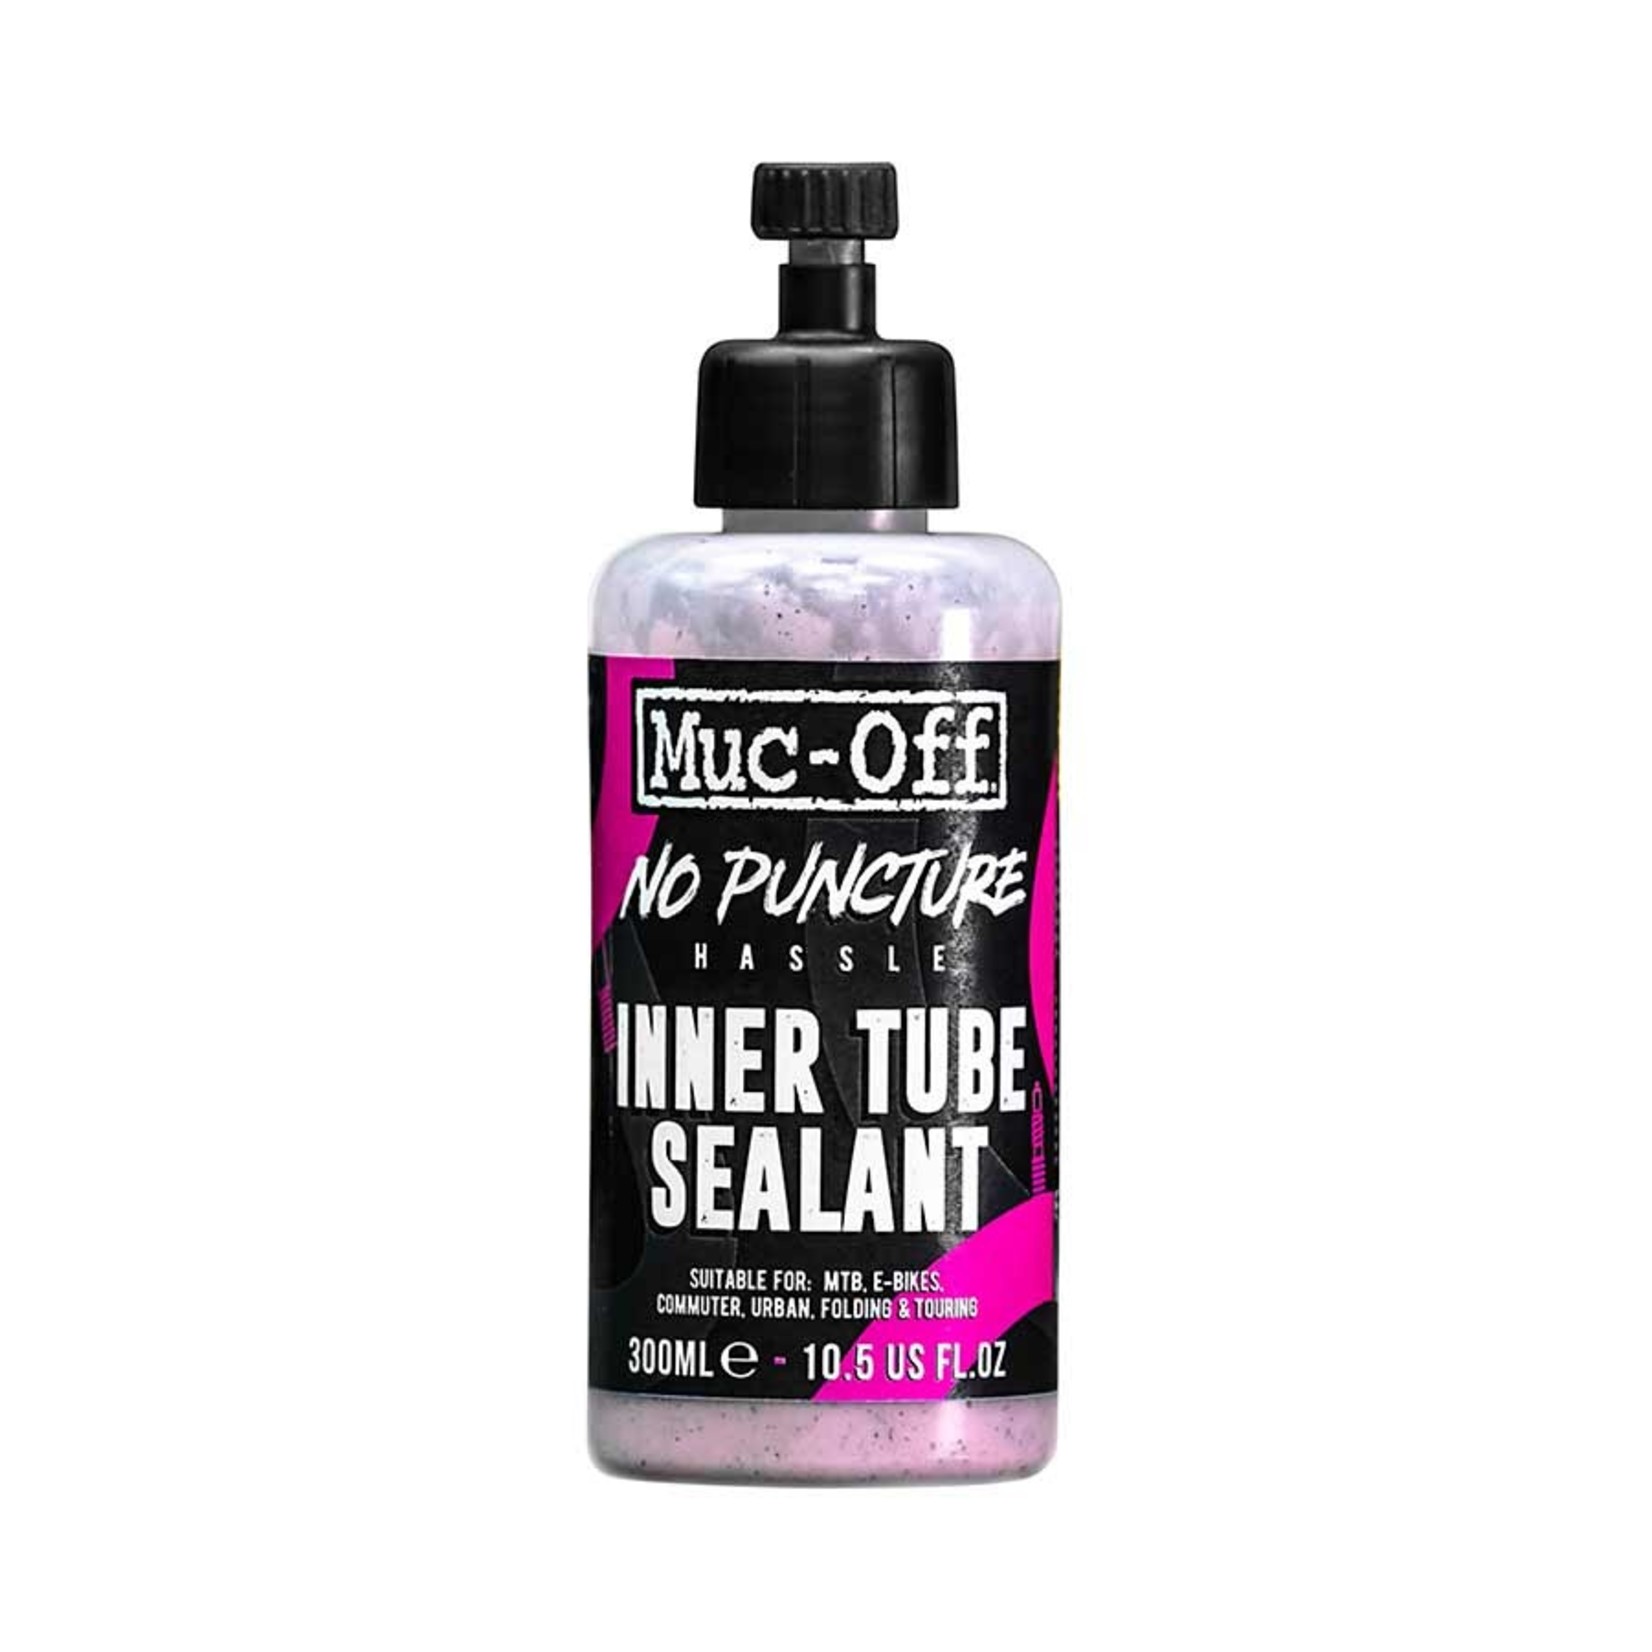 Muc-Off Muc-Off, No Puncture Hassle, inner tube Sealant, 300ml